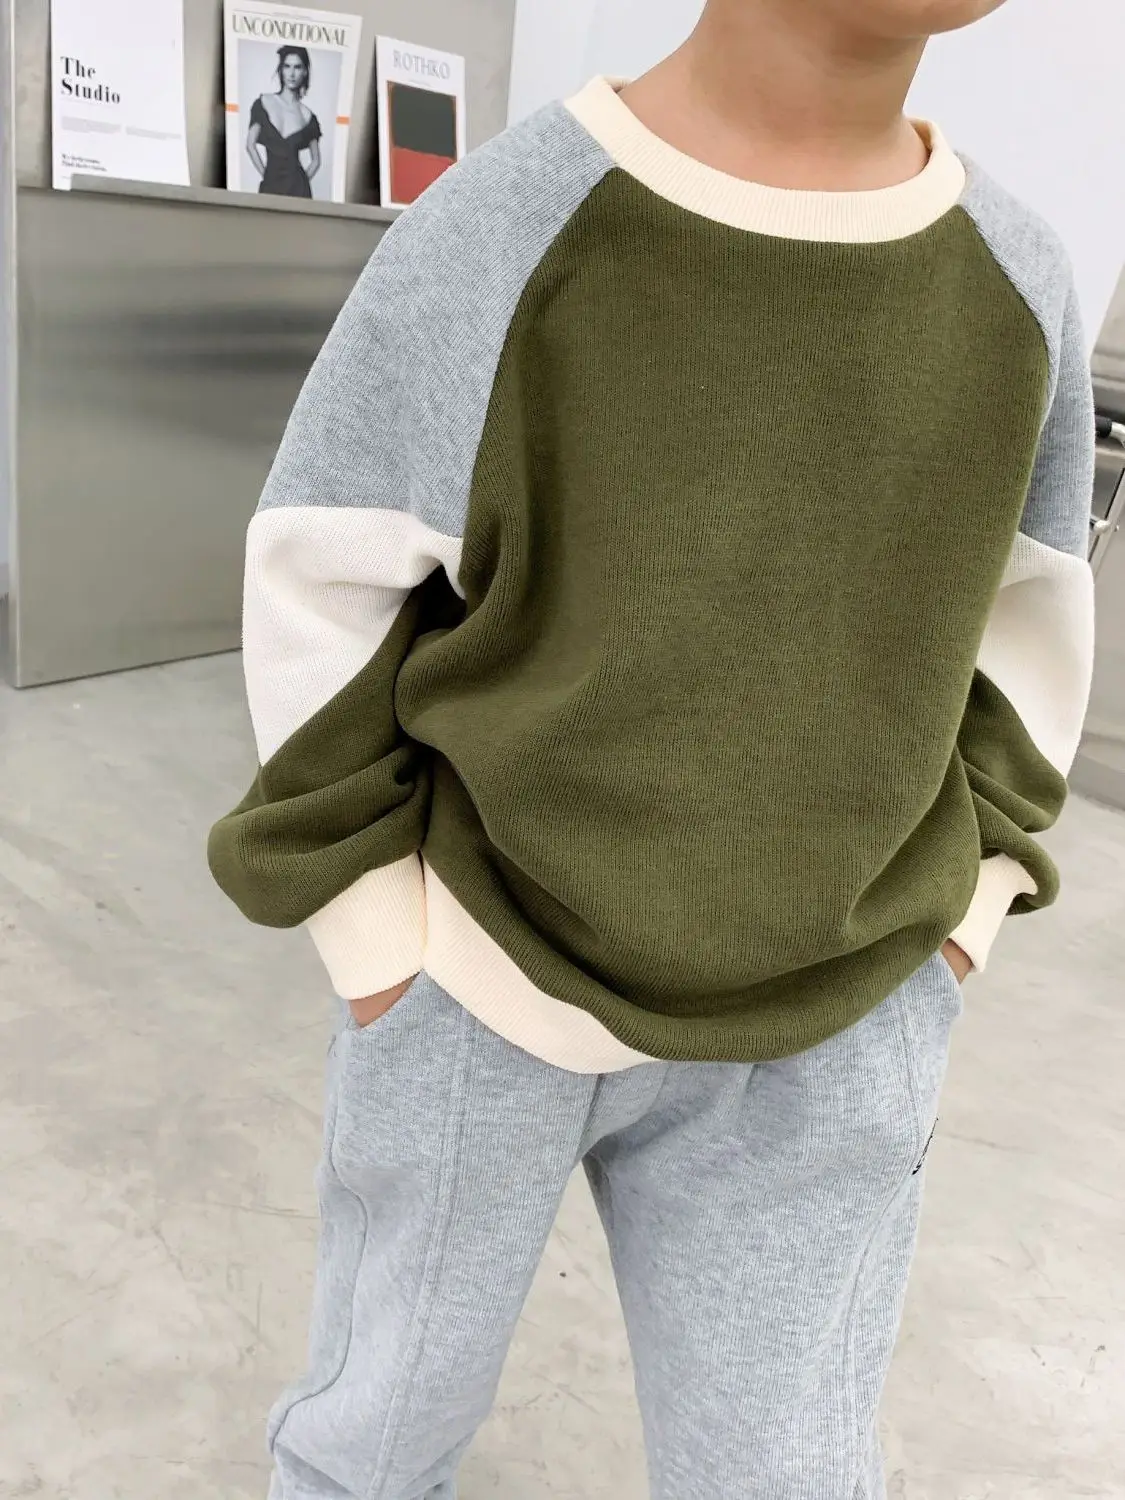 New Spring and Autumn Children's Wear Boys' Sweatshirt Round Neck Undercoat Children's Color Contrast Clothing Japanese Style enlarge